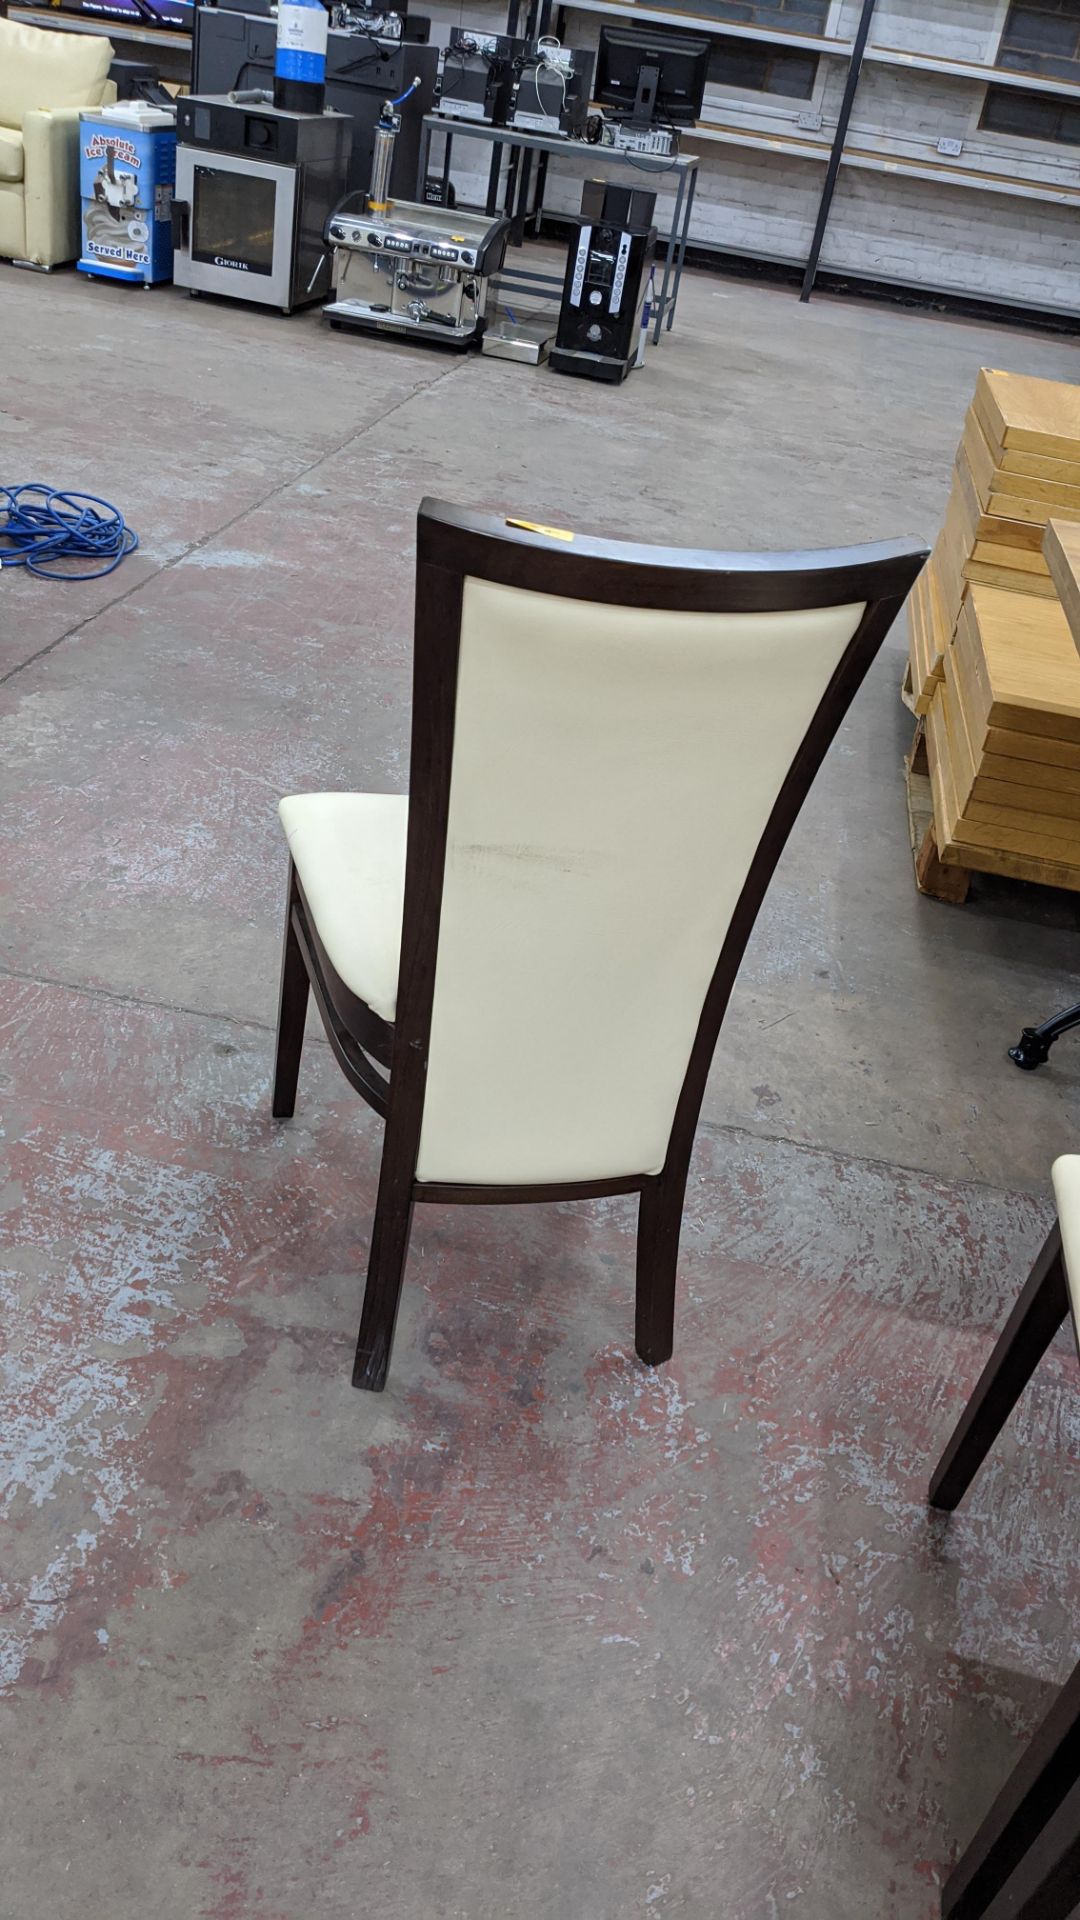 56 off matching chairs, in dark brown wood with off-white leather/leather look upholstery Lots - Image 6 of 7